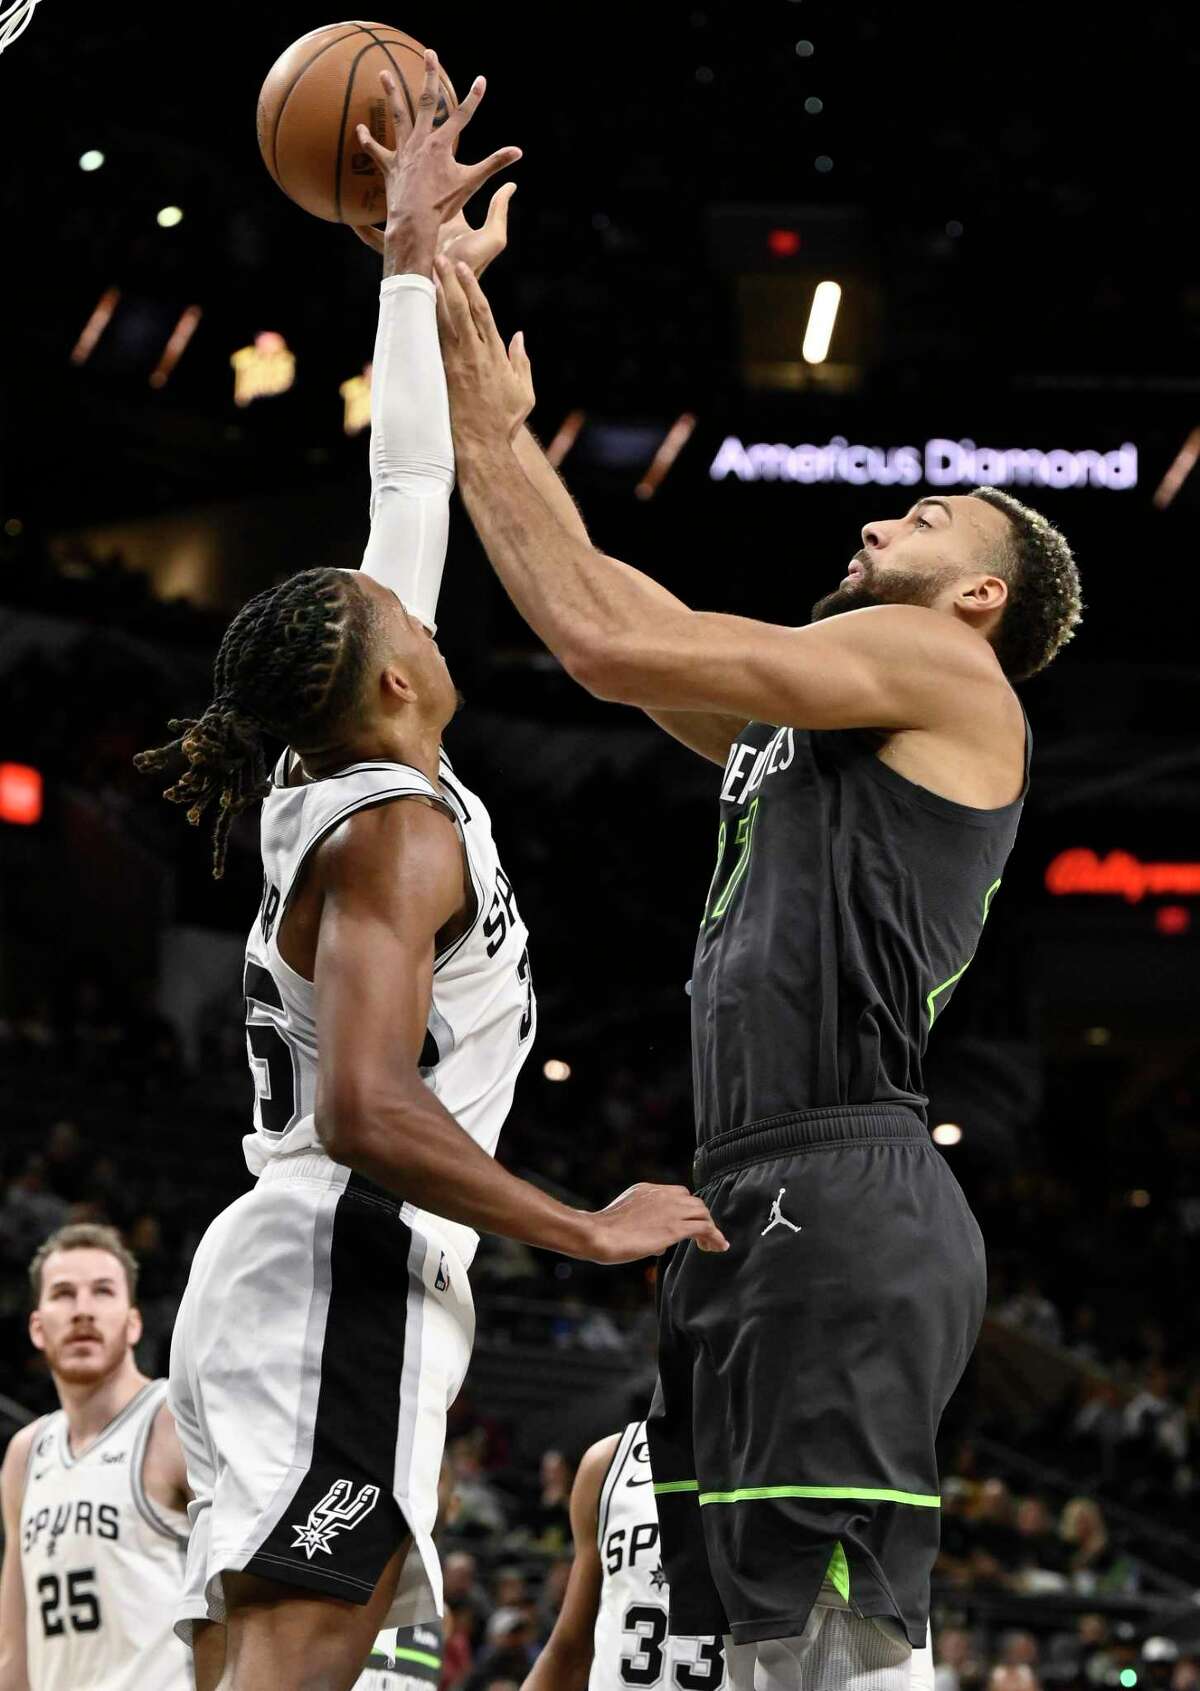 The Timberwolves' Rudy Gobert, right,knows something about good defense, and he experiences it firsthand courtesy of the Spurs' Romeo Langford.